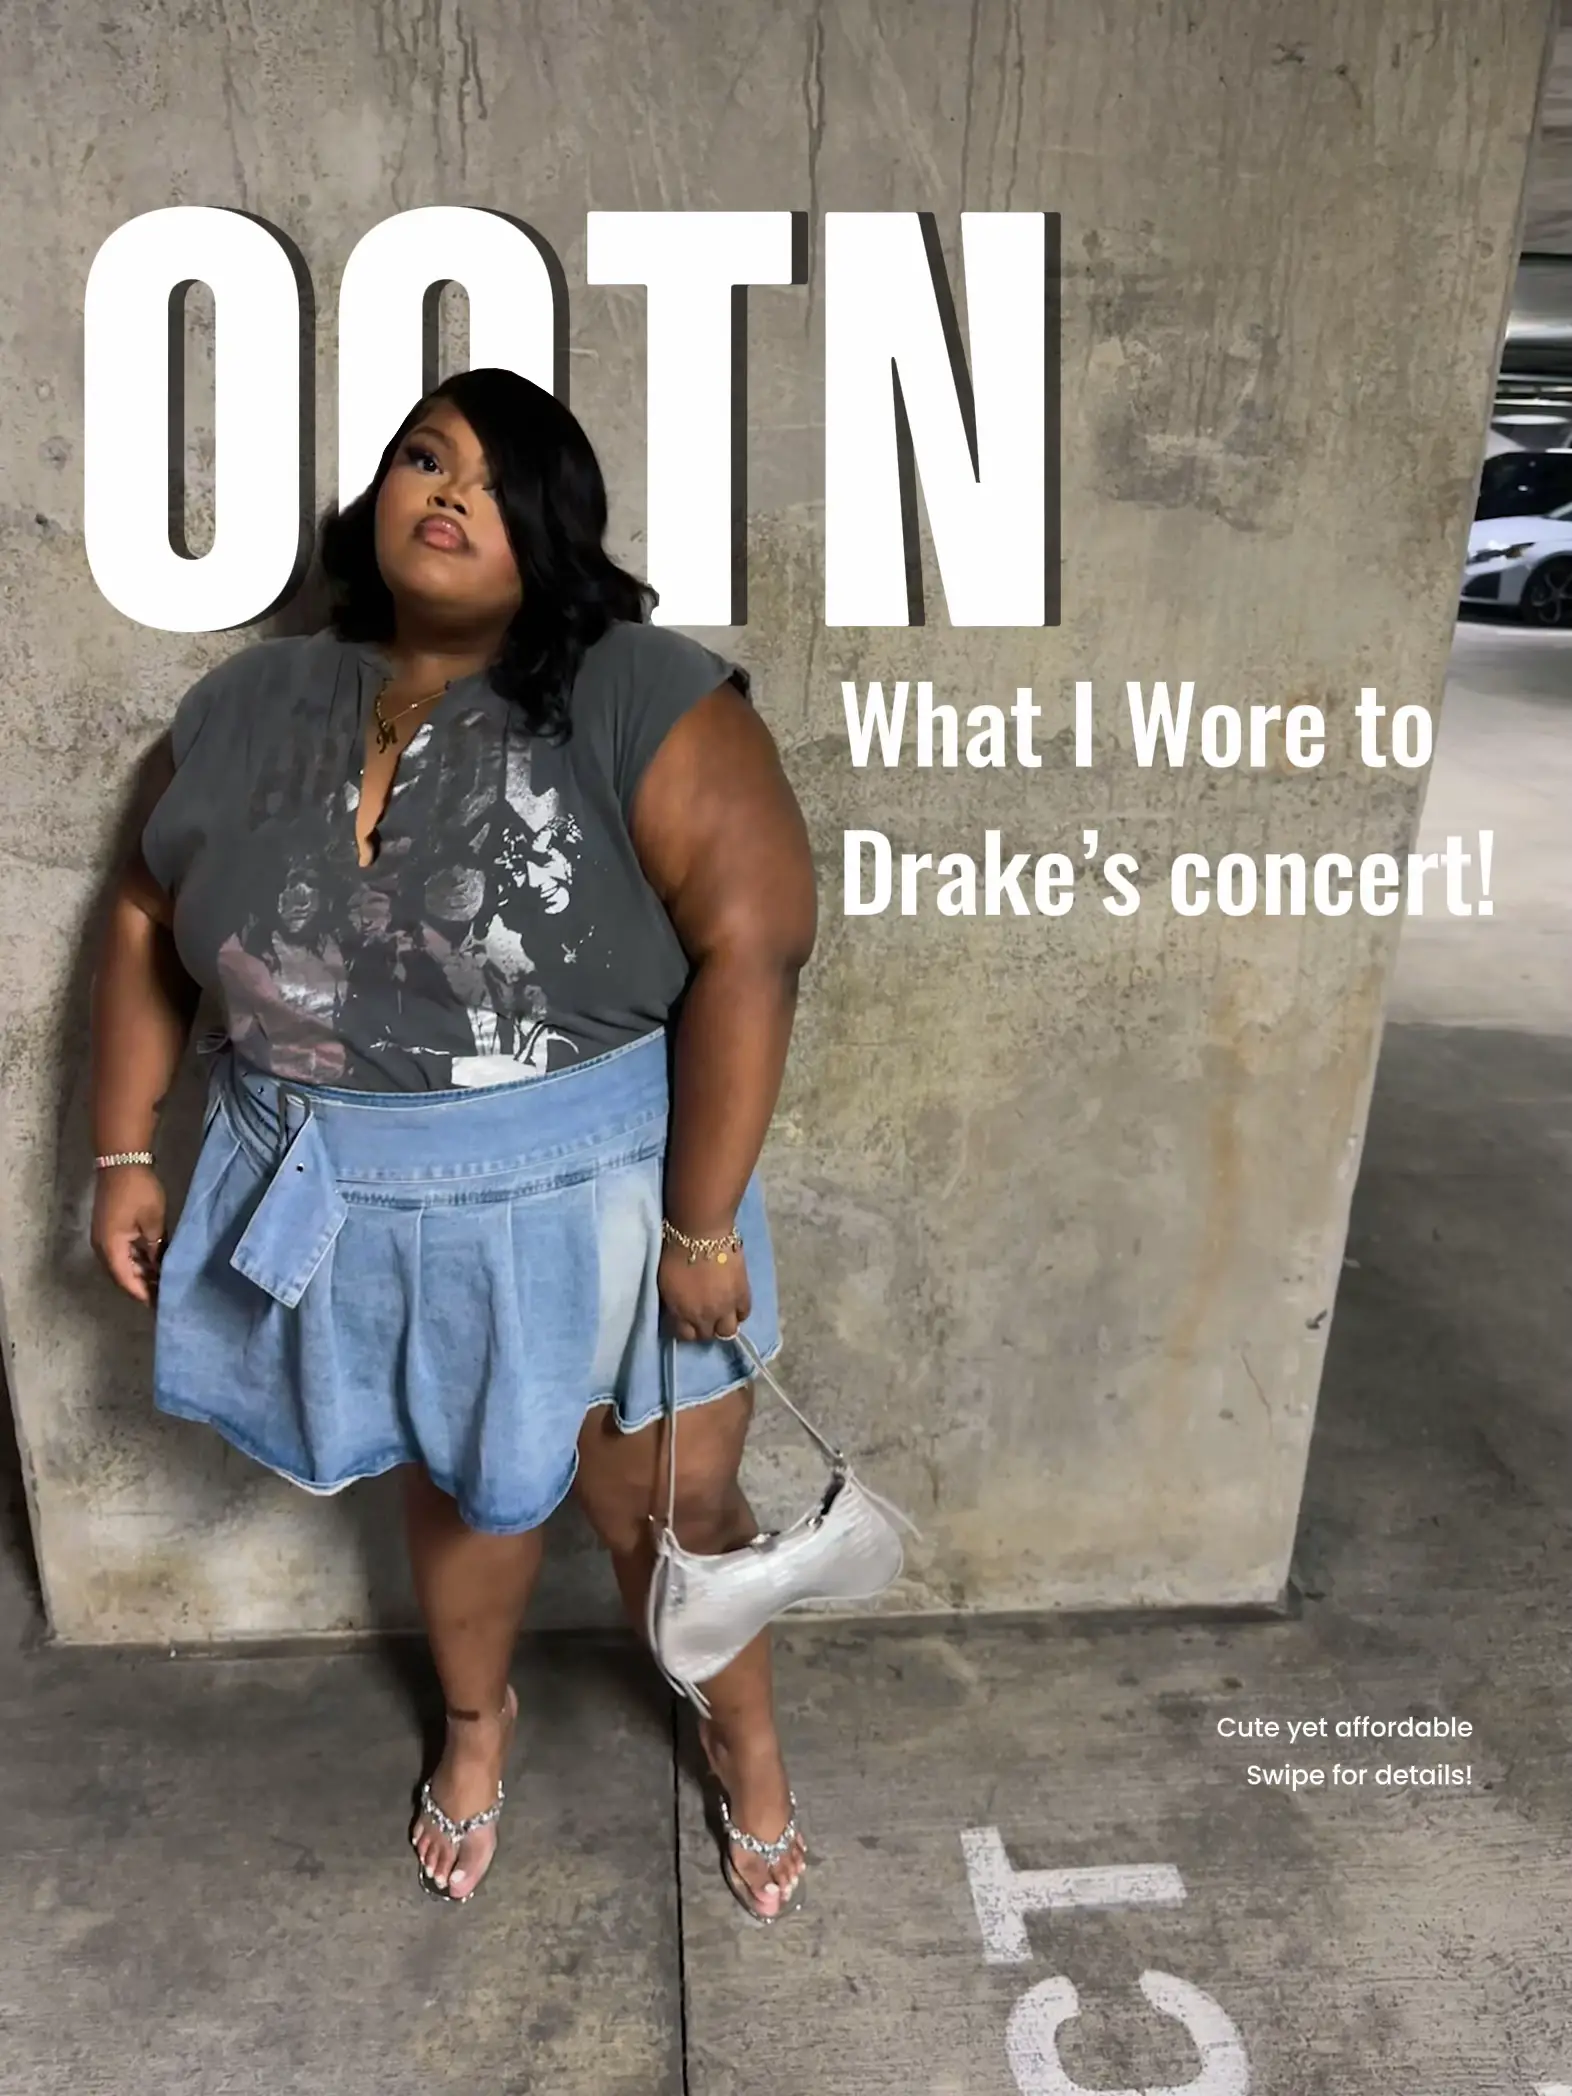 DRAKE CONCERT, Gallery posted by Michelle Oraha